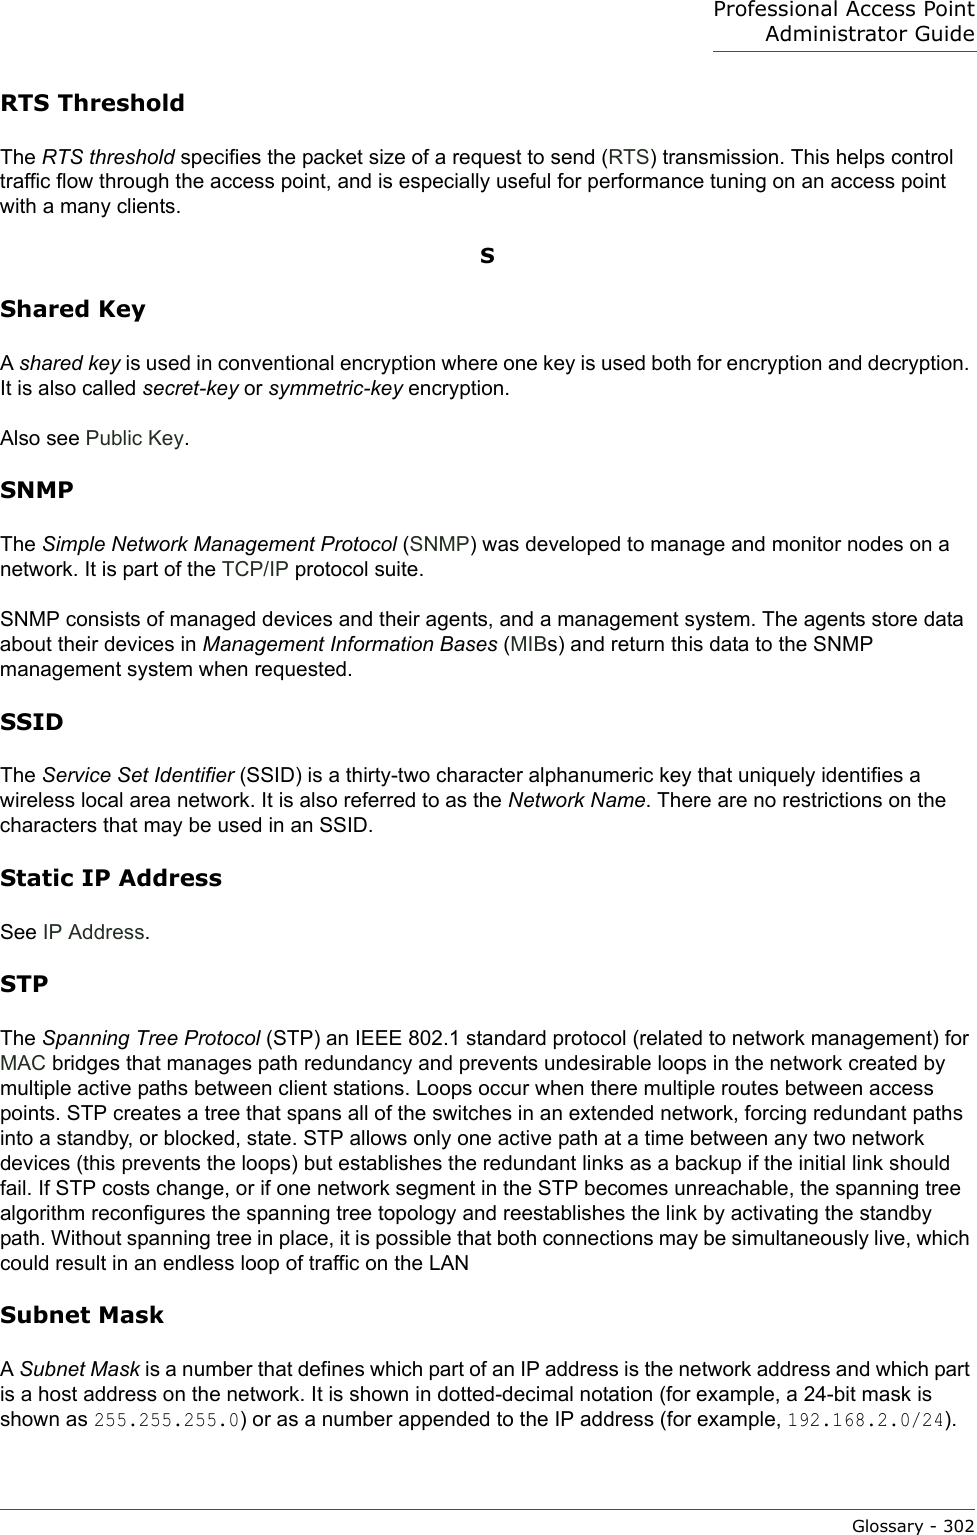 Professional Access Point Administrator GuideGlossary - 302RTS ThresholdThe RTS threshold specifies the packet size of a request to send (RTS) transmission. This helps control traffic flow through the access point, and is especially useful for performance tuning on an access point with a many clients.SShared KeyA shared key is used in conventional encryption where one key is used both for encryption and decryption. It is also called secret-key or symmetric-key encryption. Also see Public Key.SNMPThe Simple Network Management Protocol (SNMP) was developed to manage and monitor nodes on a network. It is part of the TCP/IP protocol suite. SNMP consists of managed devices and their agents, and a management system. The agents store data about their devices in Management Information Bases (MIBs) and return this data to the SNMP management system when requested.SSIDThe Service Set Identifier (SSID) is a thirty-two character alphanumeric key that uniquely identifies a wireless local area network. It is also referred to as the Network Name. There are no restrictions on the characters that may be used in an SSID.Static IP AddressSee IP Address.STPThe Spanning Tree Protocol (STP) an IEEE 802.1 standard protocol (related to network management) for MAC bridges that manages path redundancy and prevents undesirable loops in the network created by multiple active paths between client stations. Loops occur when there multiple routes between access points. STP creates a tree that spans all of the switches in an extended network, forcing redundant paths into a standby, or blocked, state. STP allows only one active path at a time between any two network devices (this prevents the loops) but establishes the redundant links as a backup if the initial link should fail. If STP costs change, or if one network segment in the STP becomes unreachable, the spanning tree algorithm reconfigures the spanning tree topology and reestablishes the link by activating the standby path. Without spanning tree in place, it is possible that both connections may be simultaneously live, which could result in an endless loop of traffic on the LANSubnet MaskA Subnet Mask is a number that defines which part of an IP address is the network address and which part is a host address on the network. It is shown in dotted-decimal notation (for example, a 24-bit mask is shown as 255.255.255.0) or as a number appended to the IP address (for example, 192.168.2.0/24). 